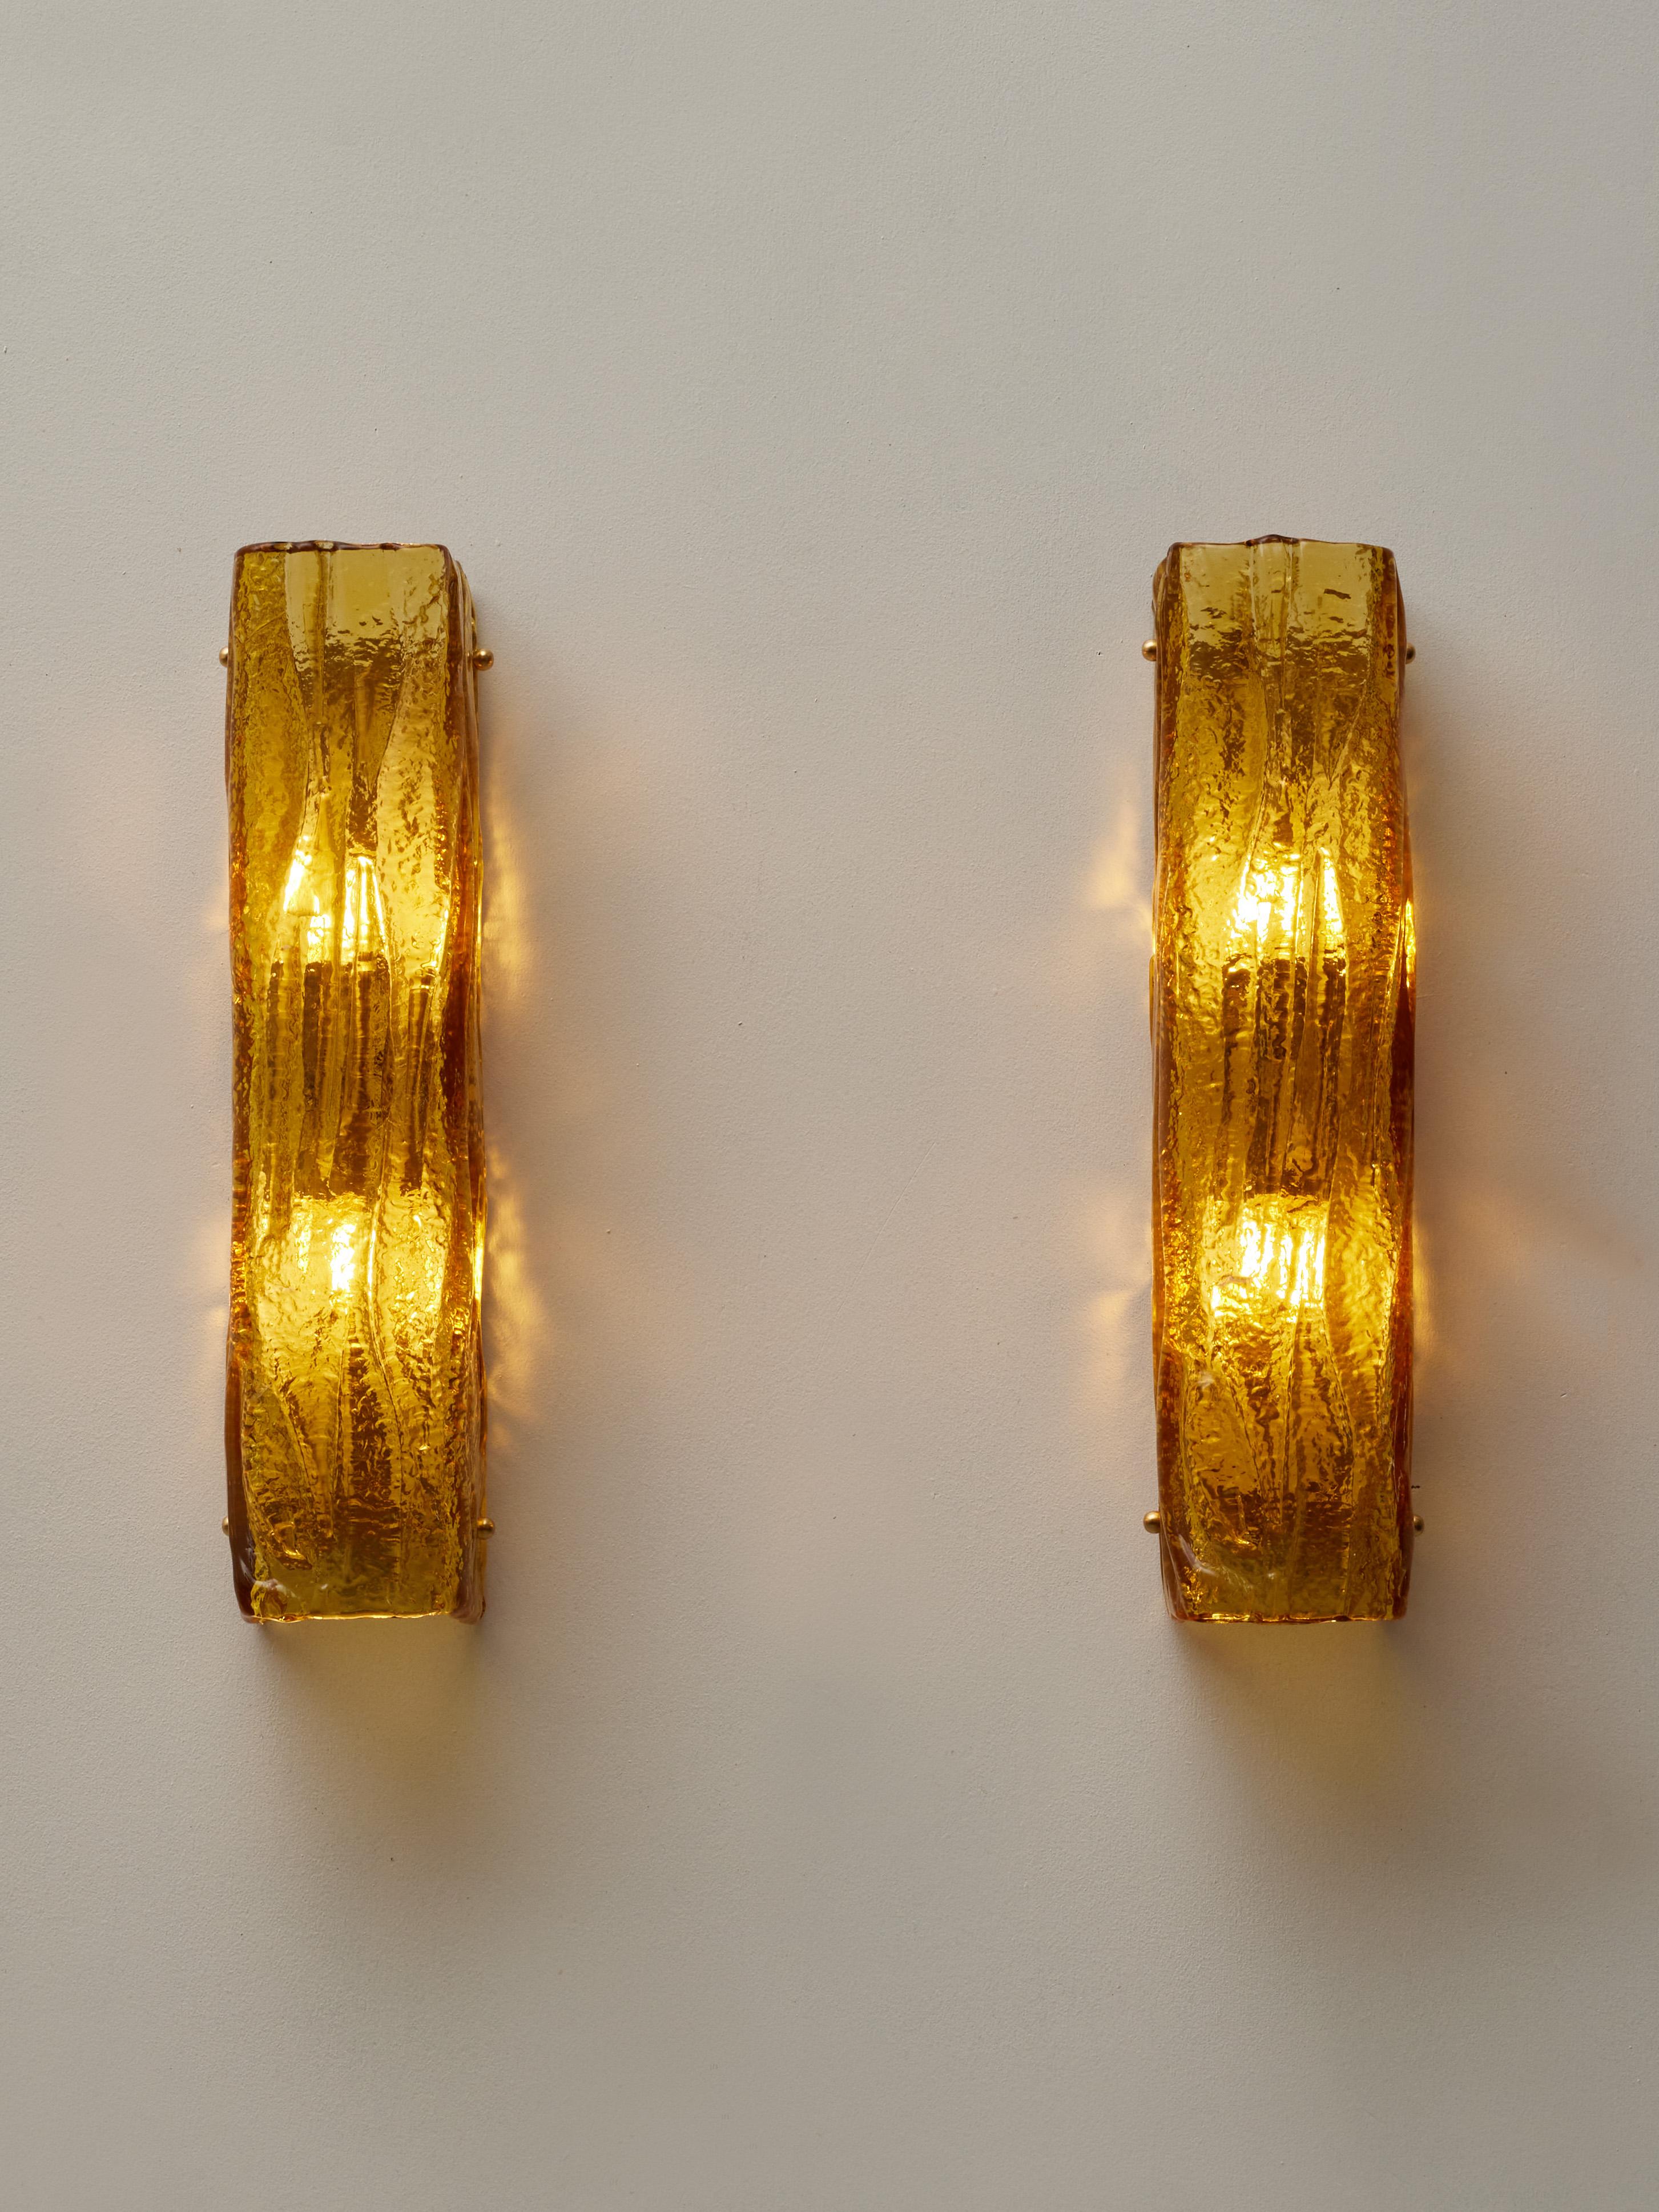 Splendid pair of sconces in sculpted and amber tainted Murano glass by Studio Glustin.